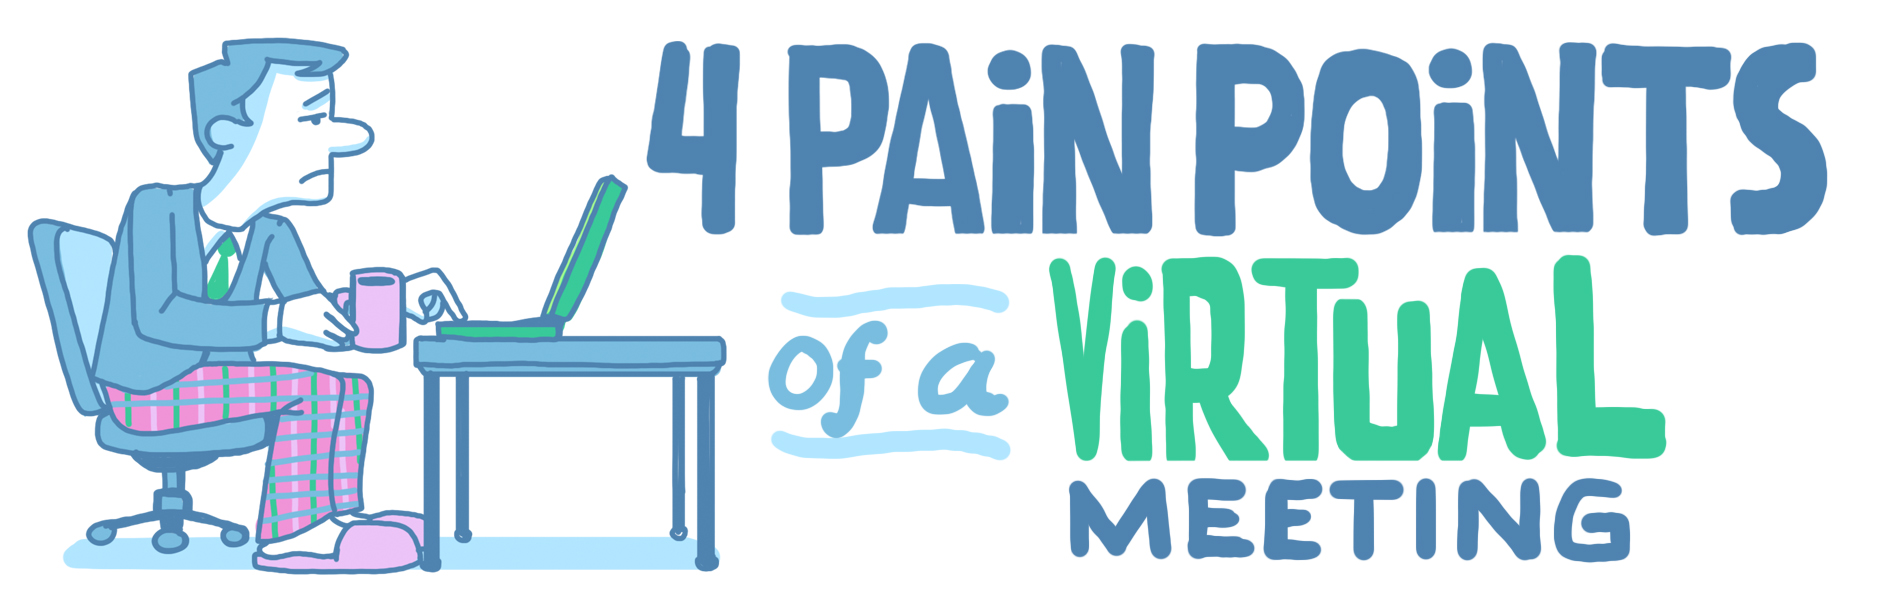 Animated sketch of a man working on a computer from home with text heading that reads "4 Pain Points of a Virtual Meeting"